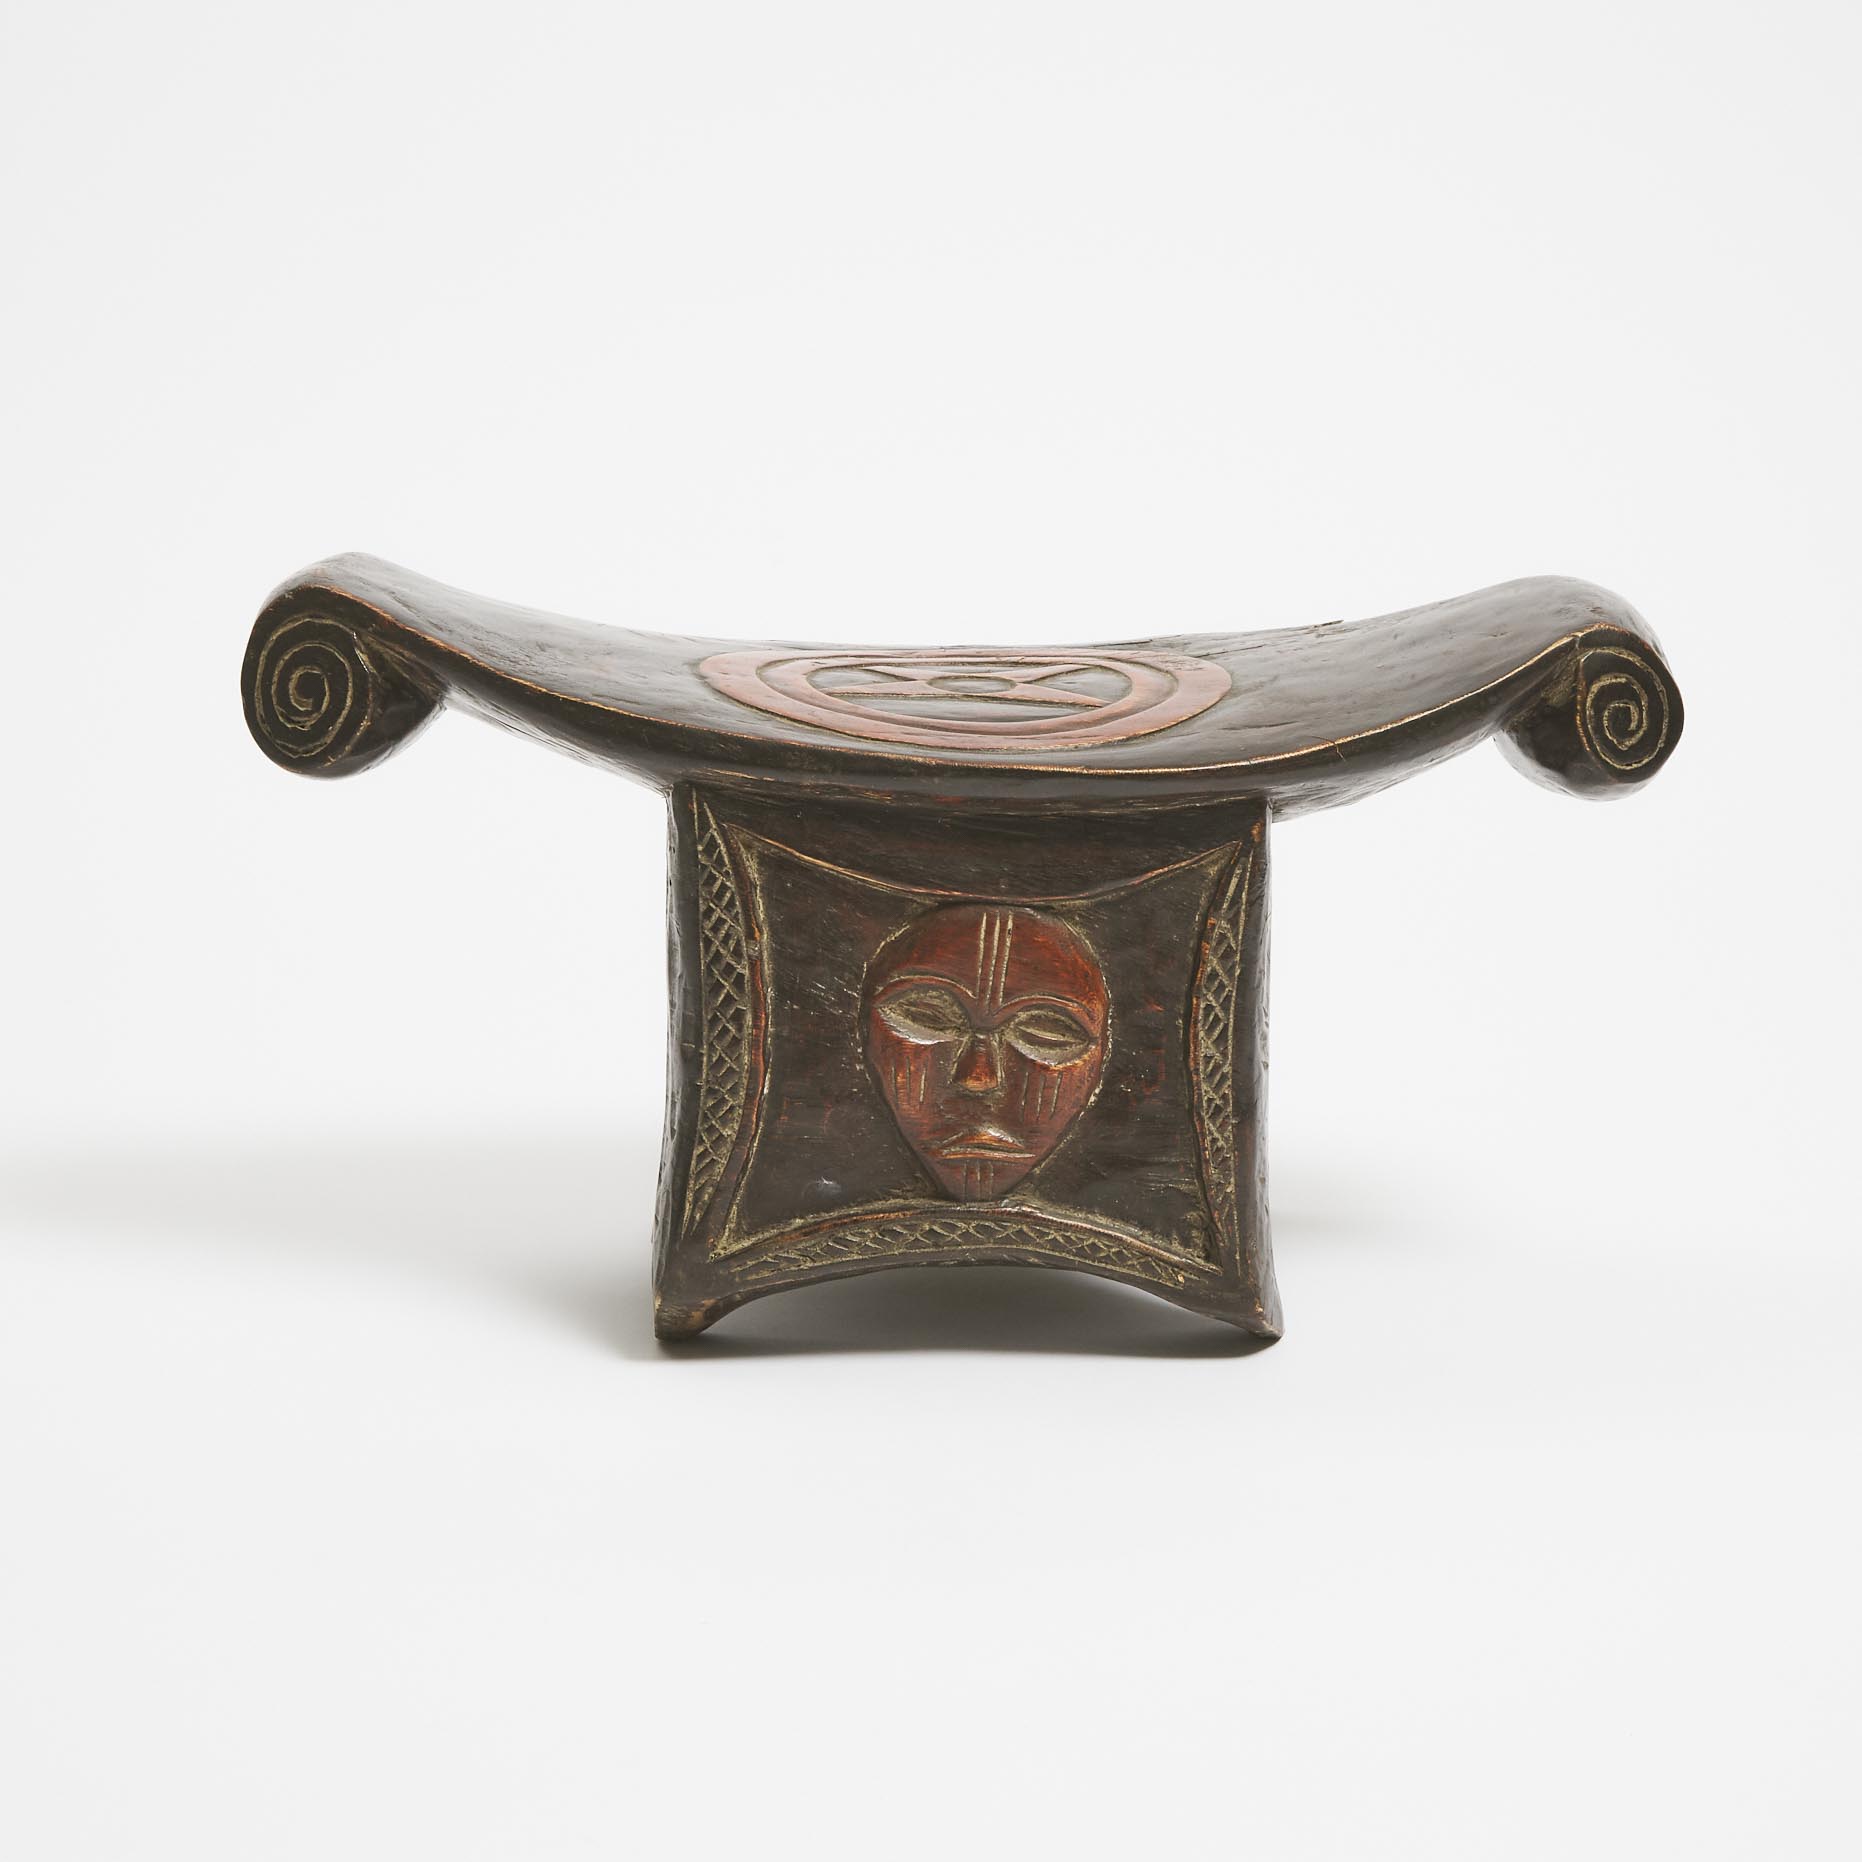 African Stool, possibly Lega, Democratic Republic of Congo, Central Africa, mid to late 20th century